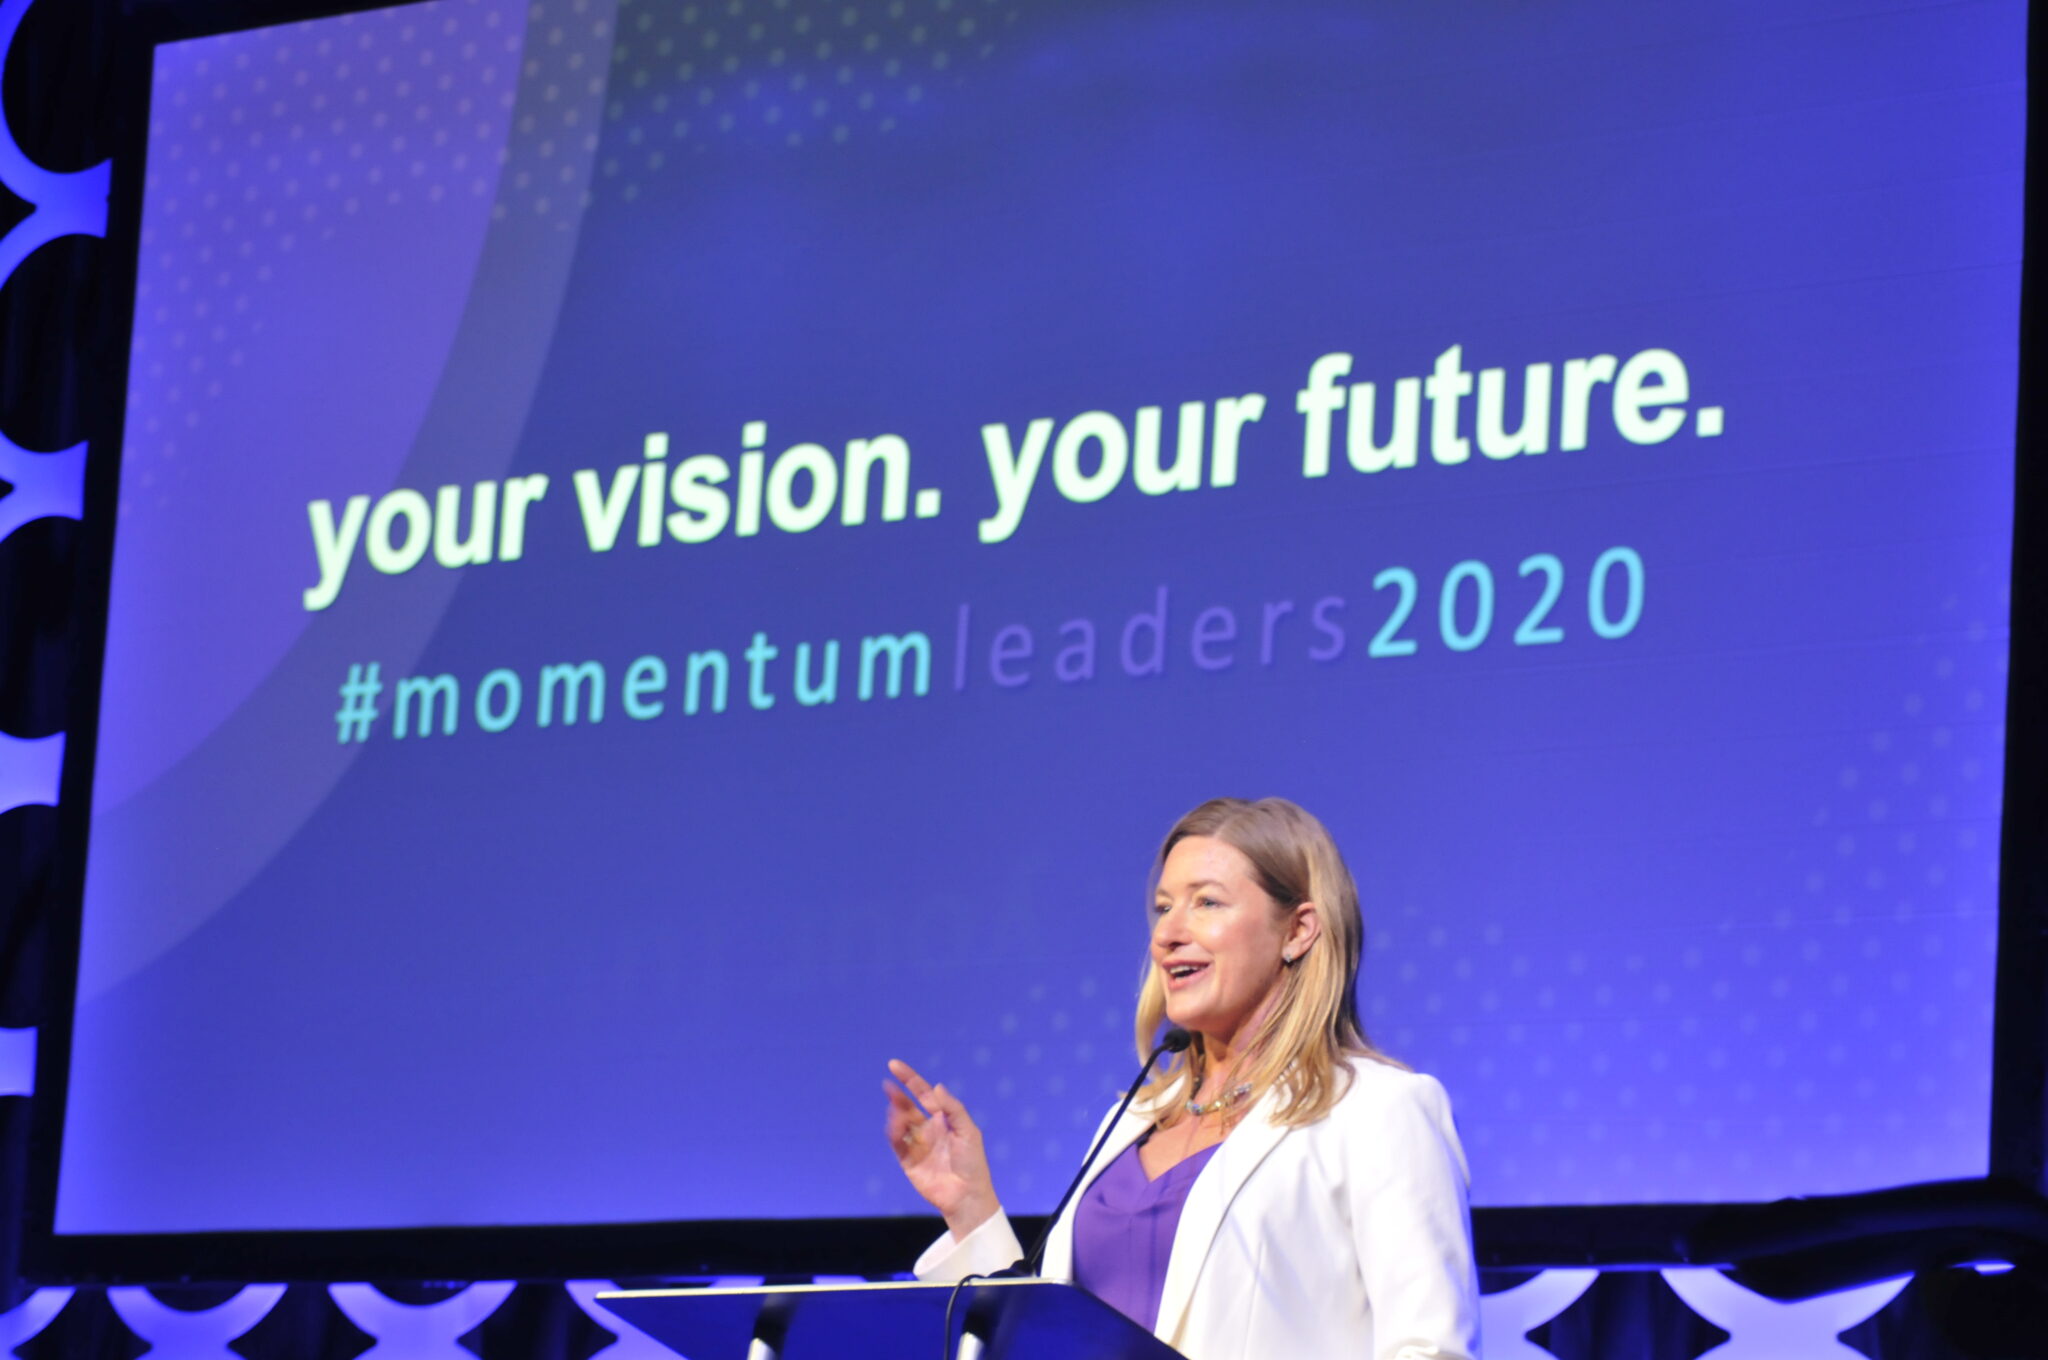 April Benetollo at Momentum Conference in 2020